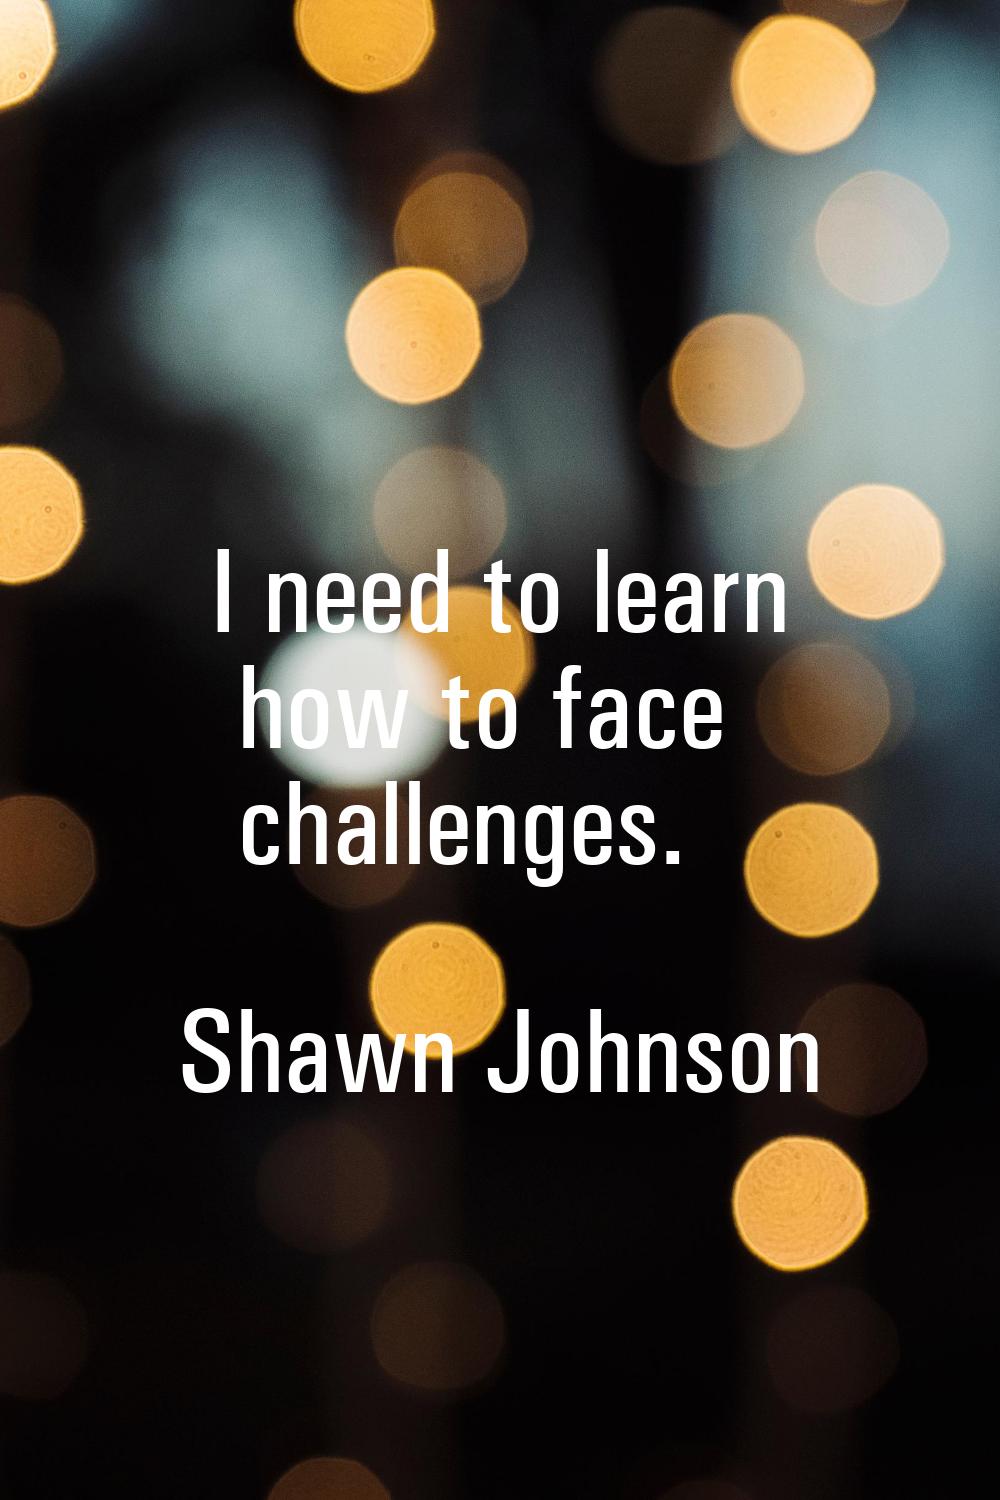 I need to learn how to face challenges.